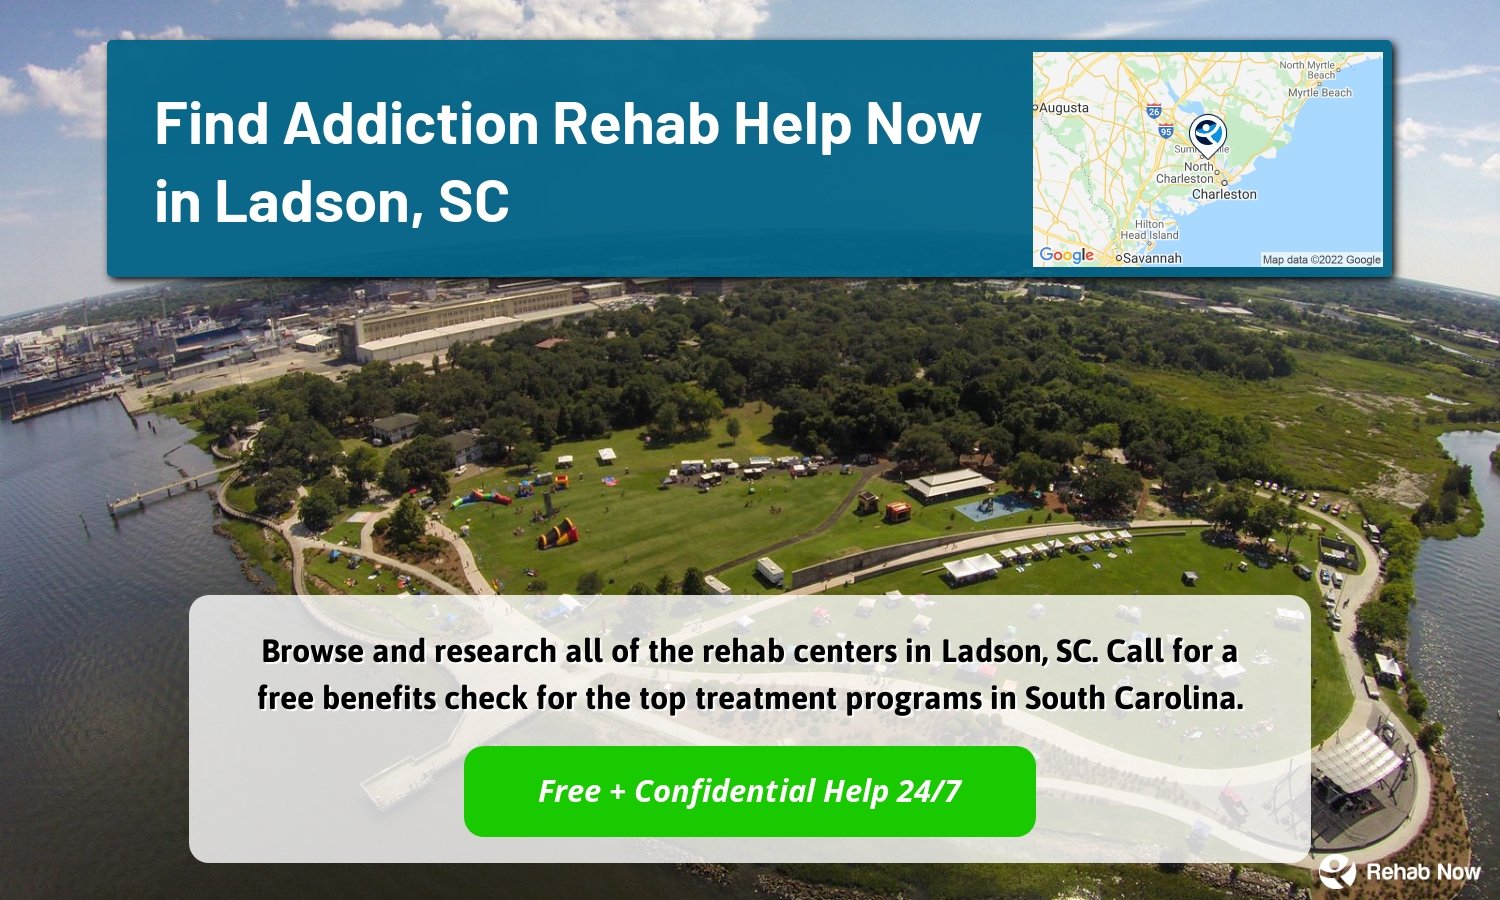 Browse and research all of the rehab centers in Ladson, SC. Call for a free benefits check for the top treatment programs in South Carolina.